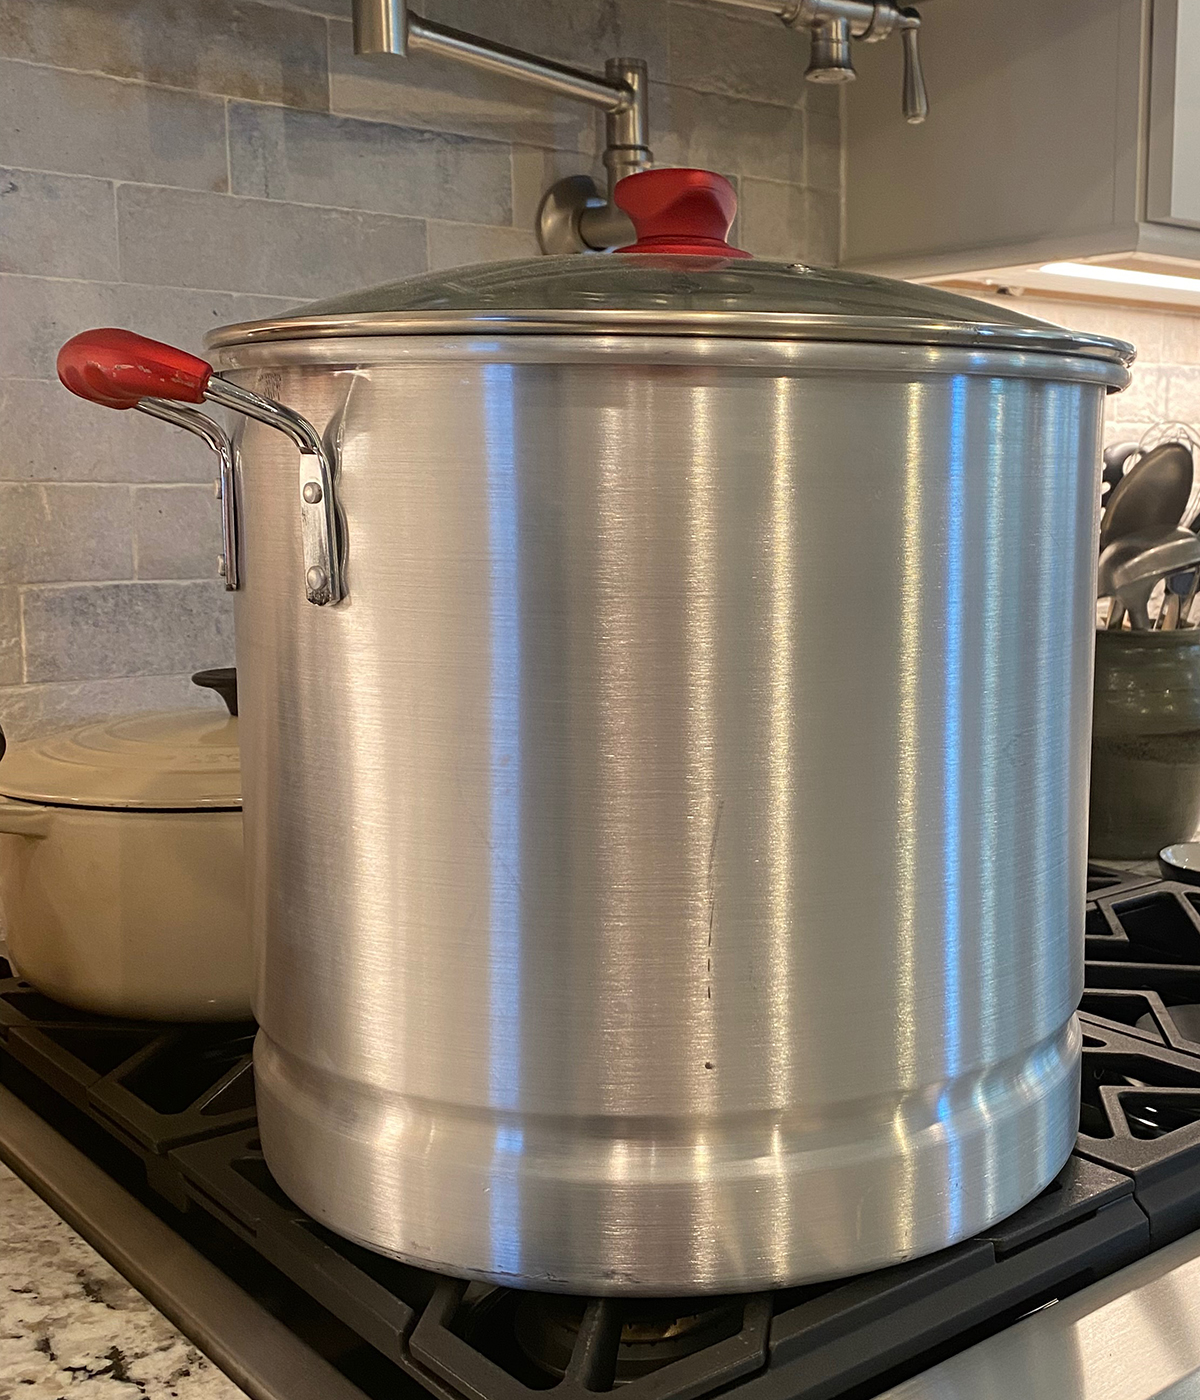 Extra large cooking pot on a stovetop.